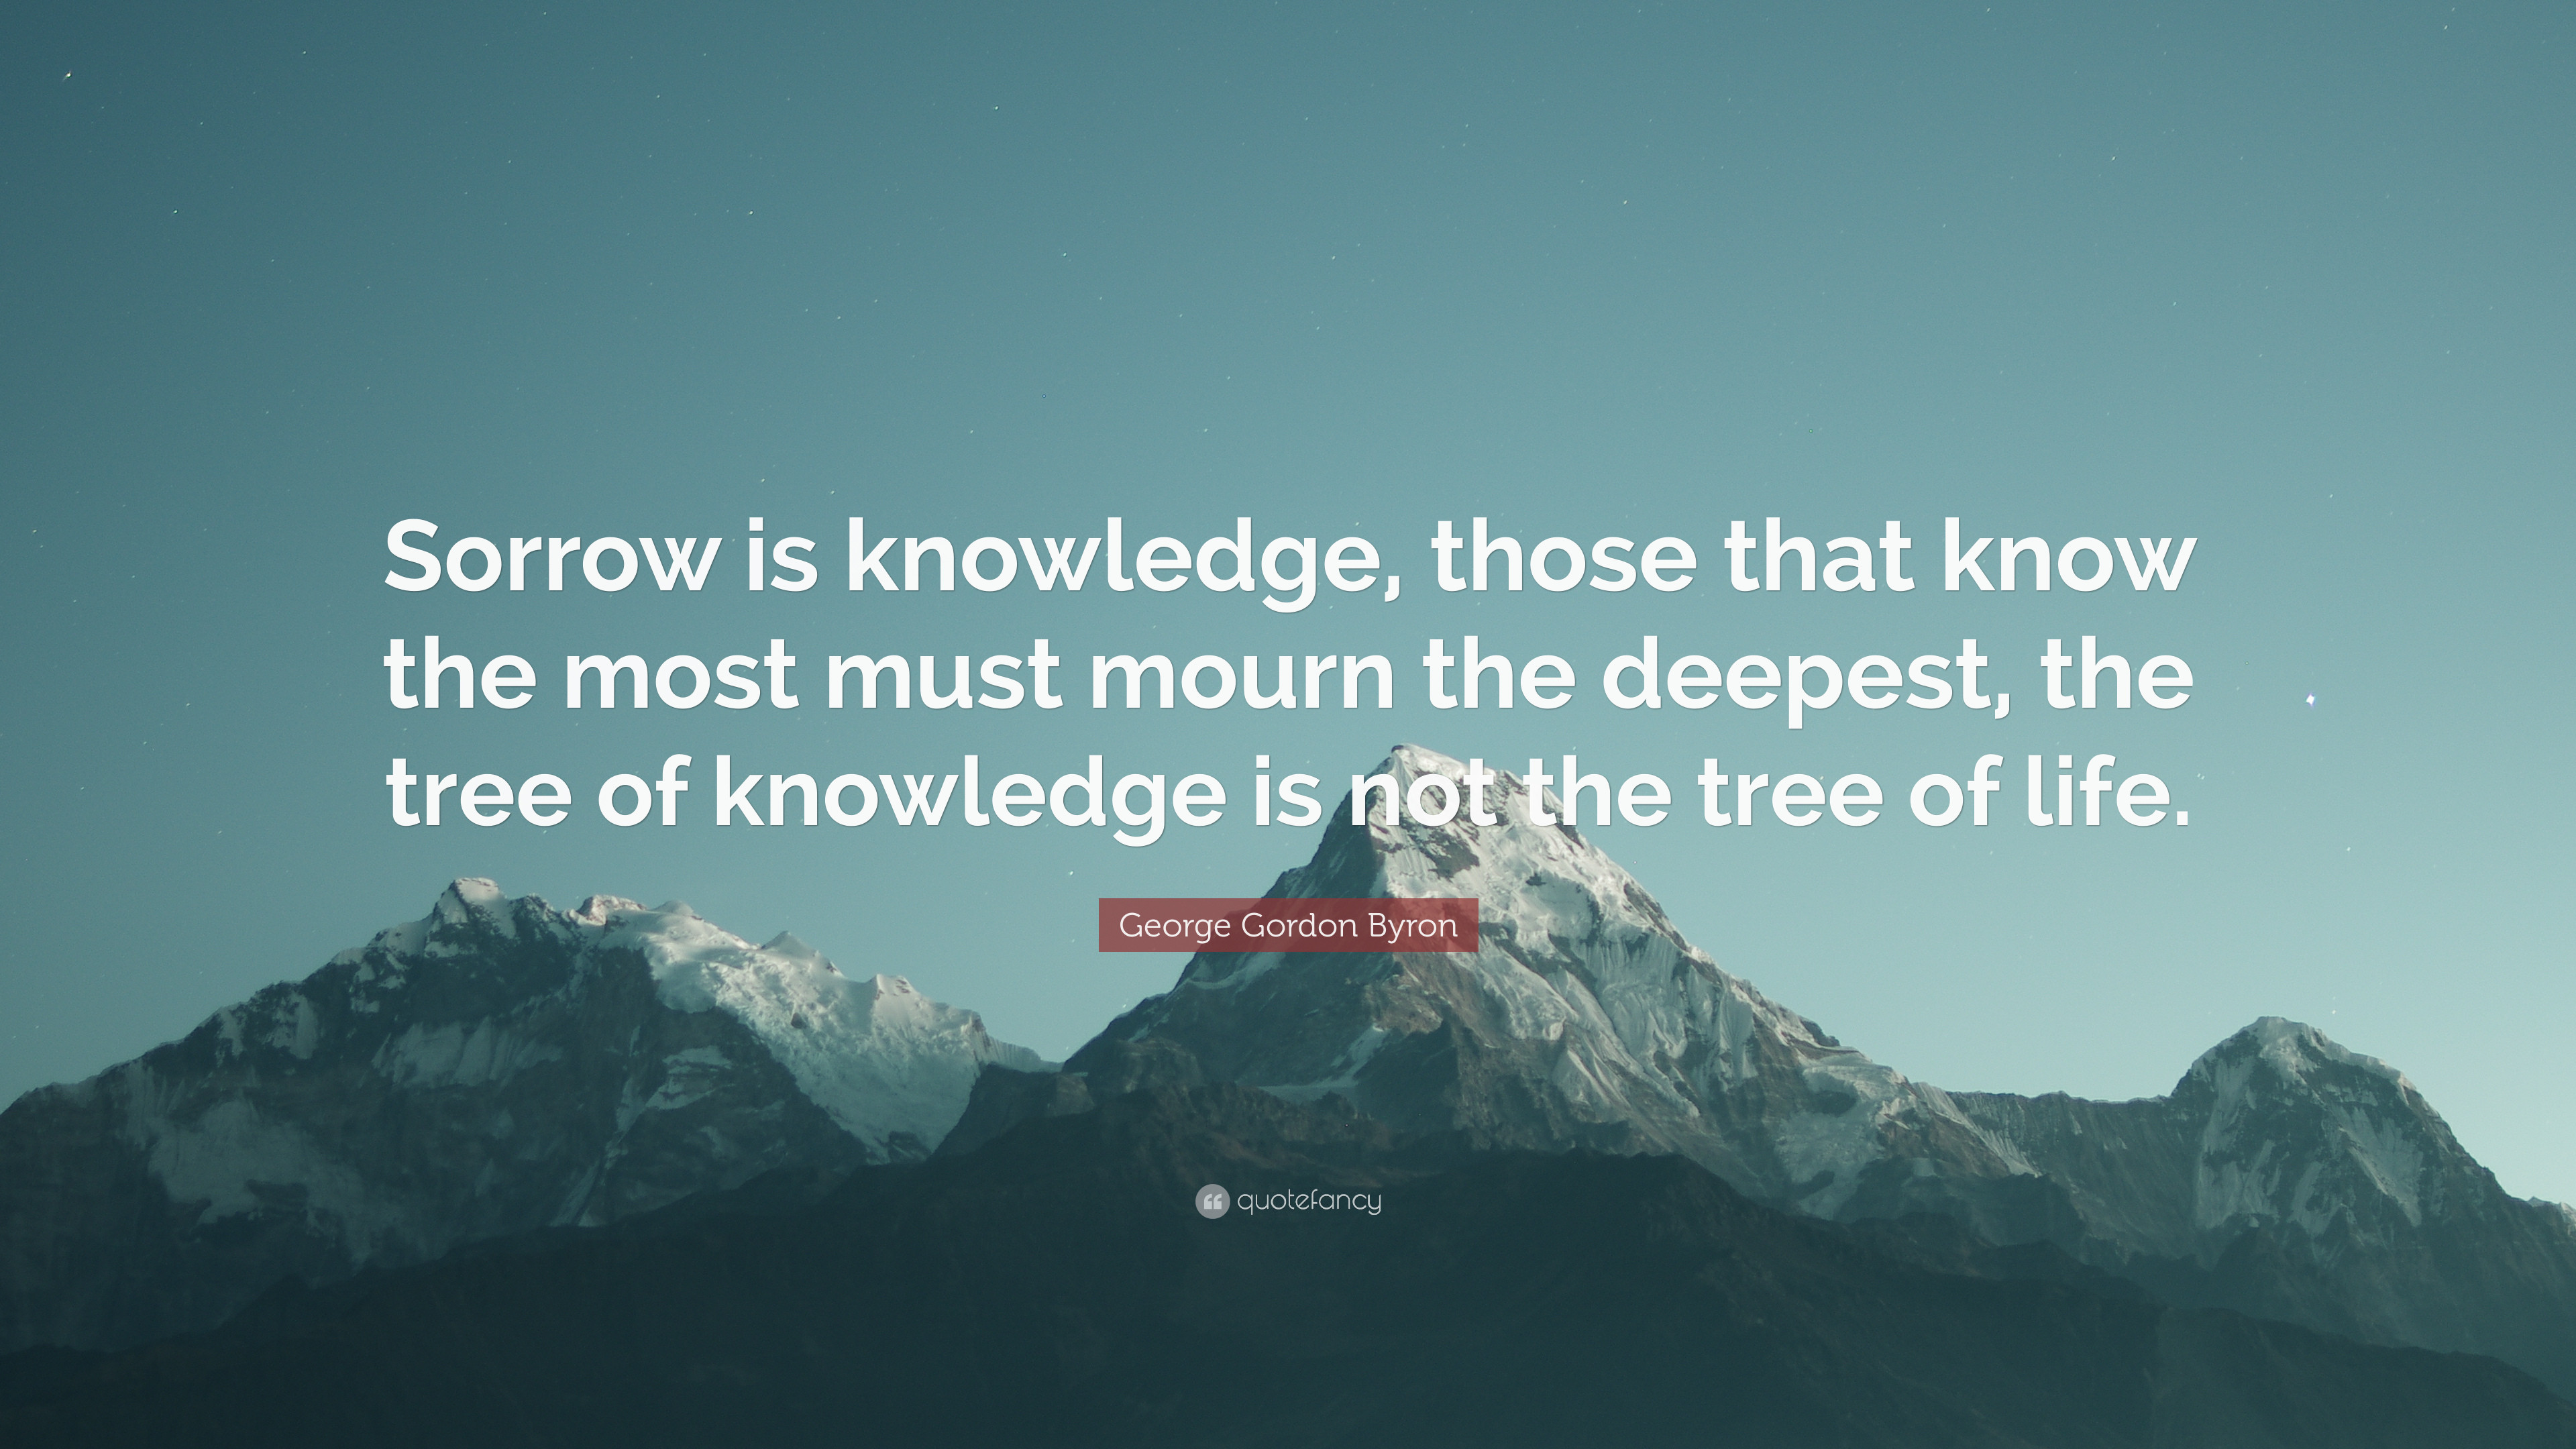 3840x2160 George Gordon Byron Quote: “Sorrow is knowledge, those that know the most  must